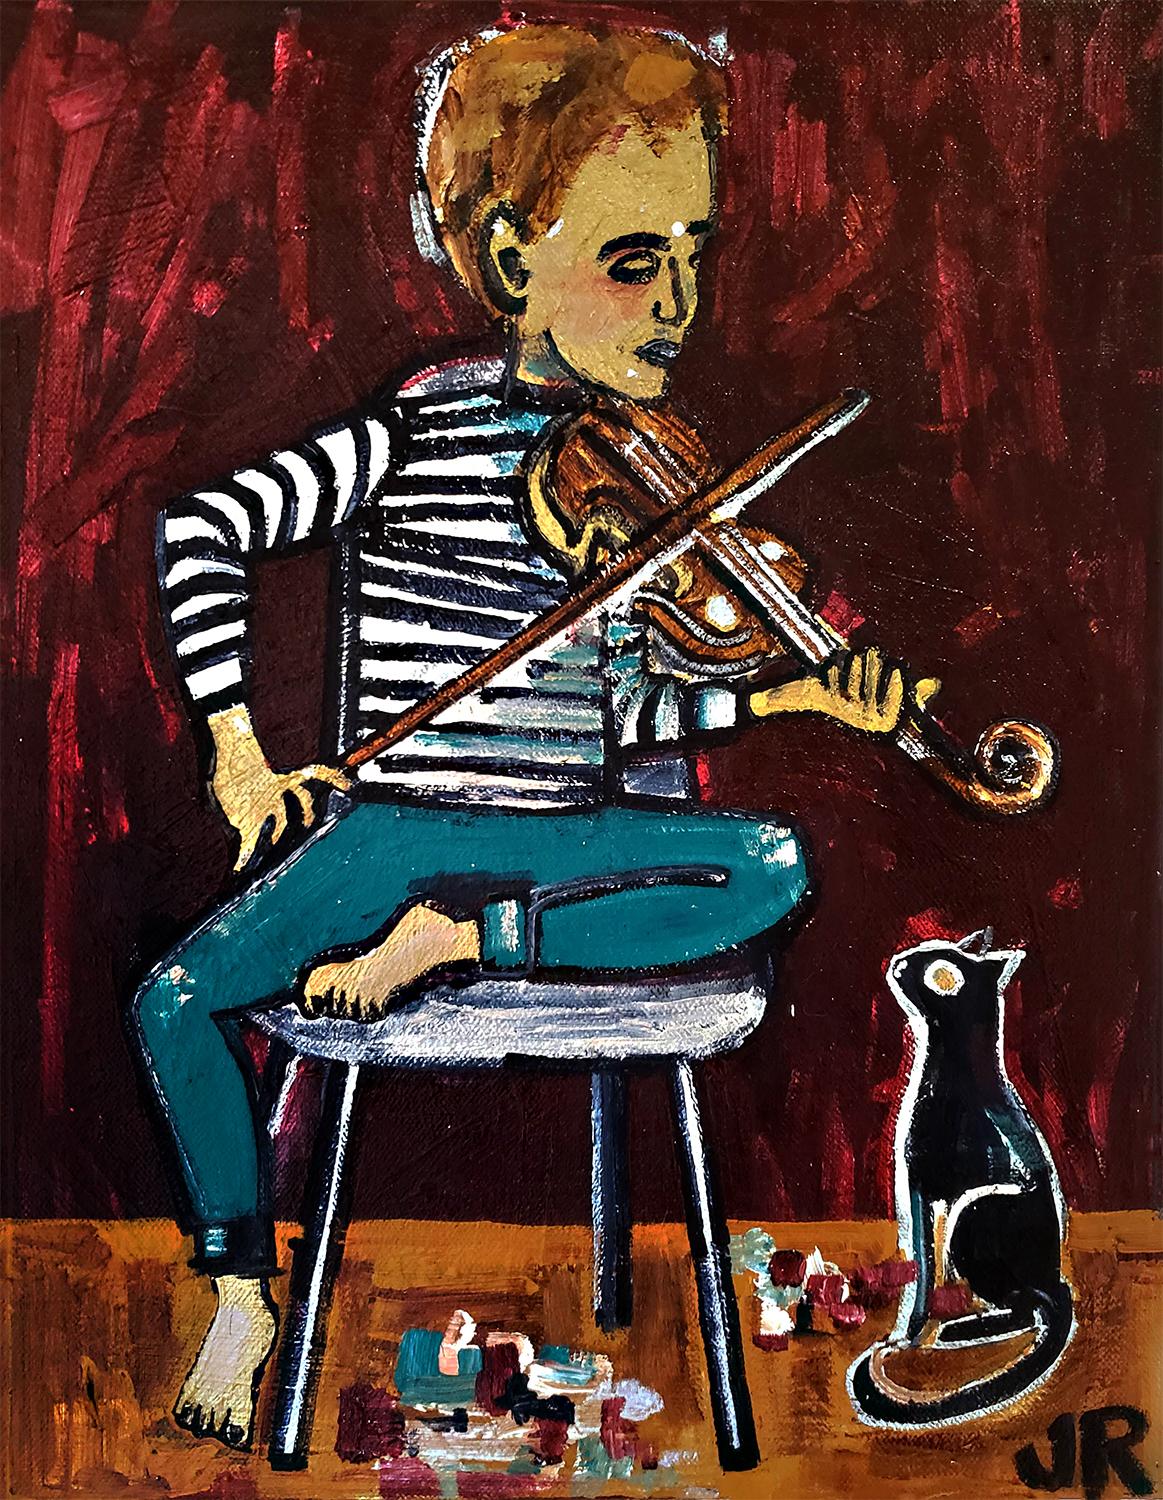 Jessica JH Roller Figurative Painting - Boy Playing Violin, Original Painting